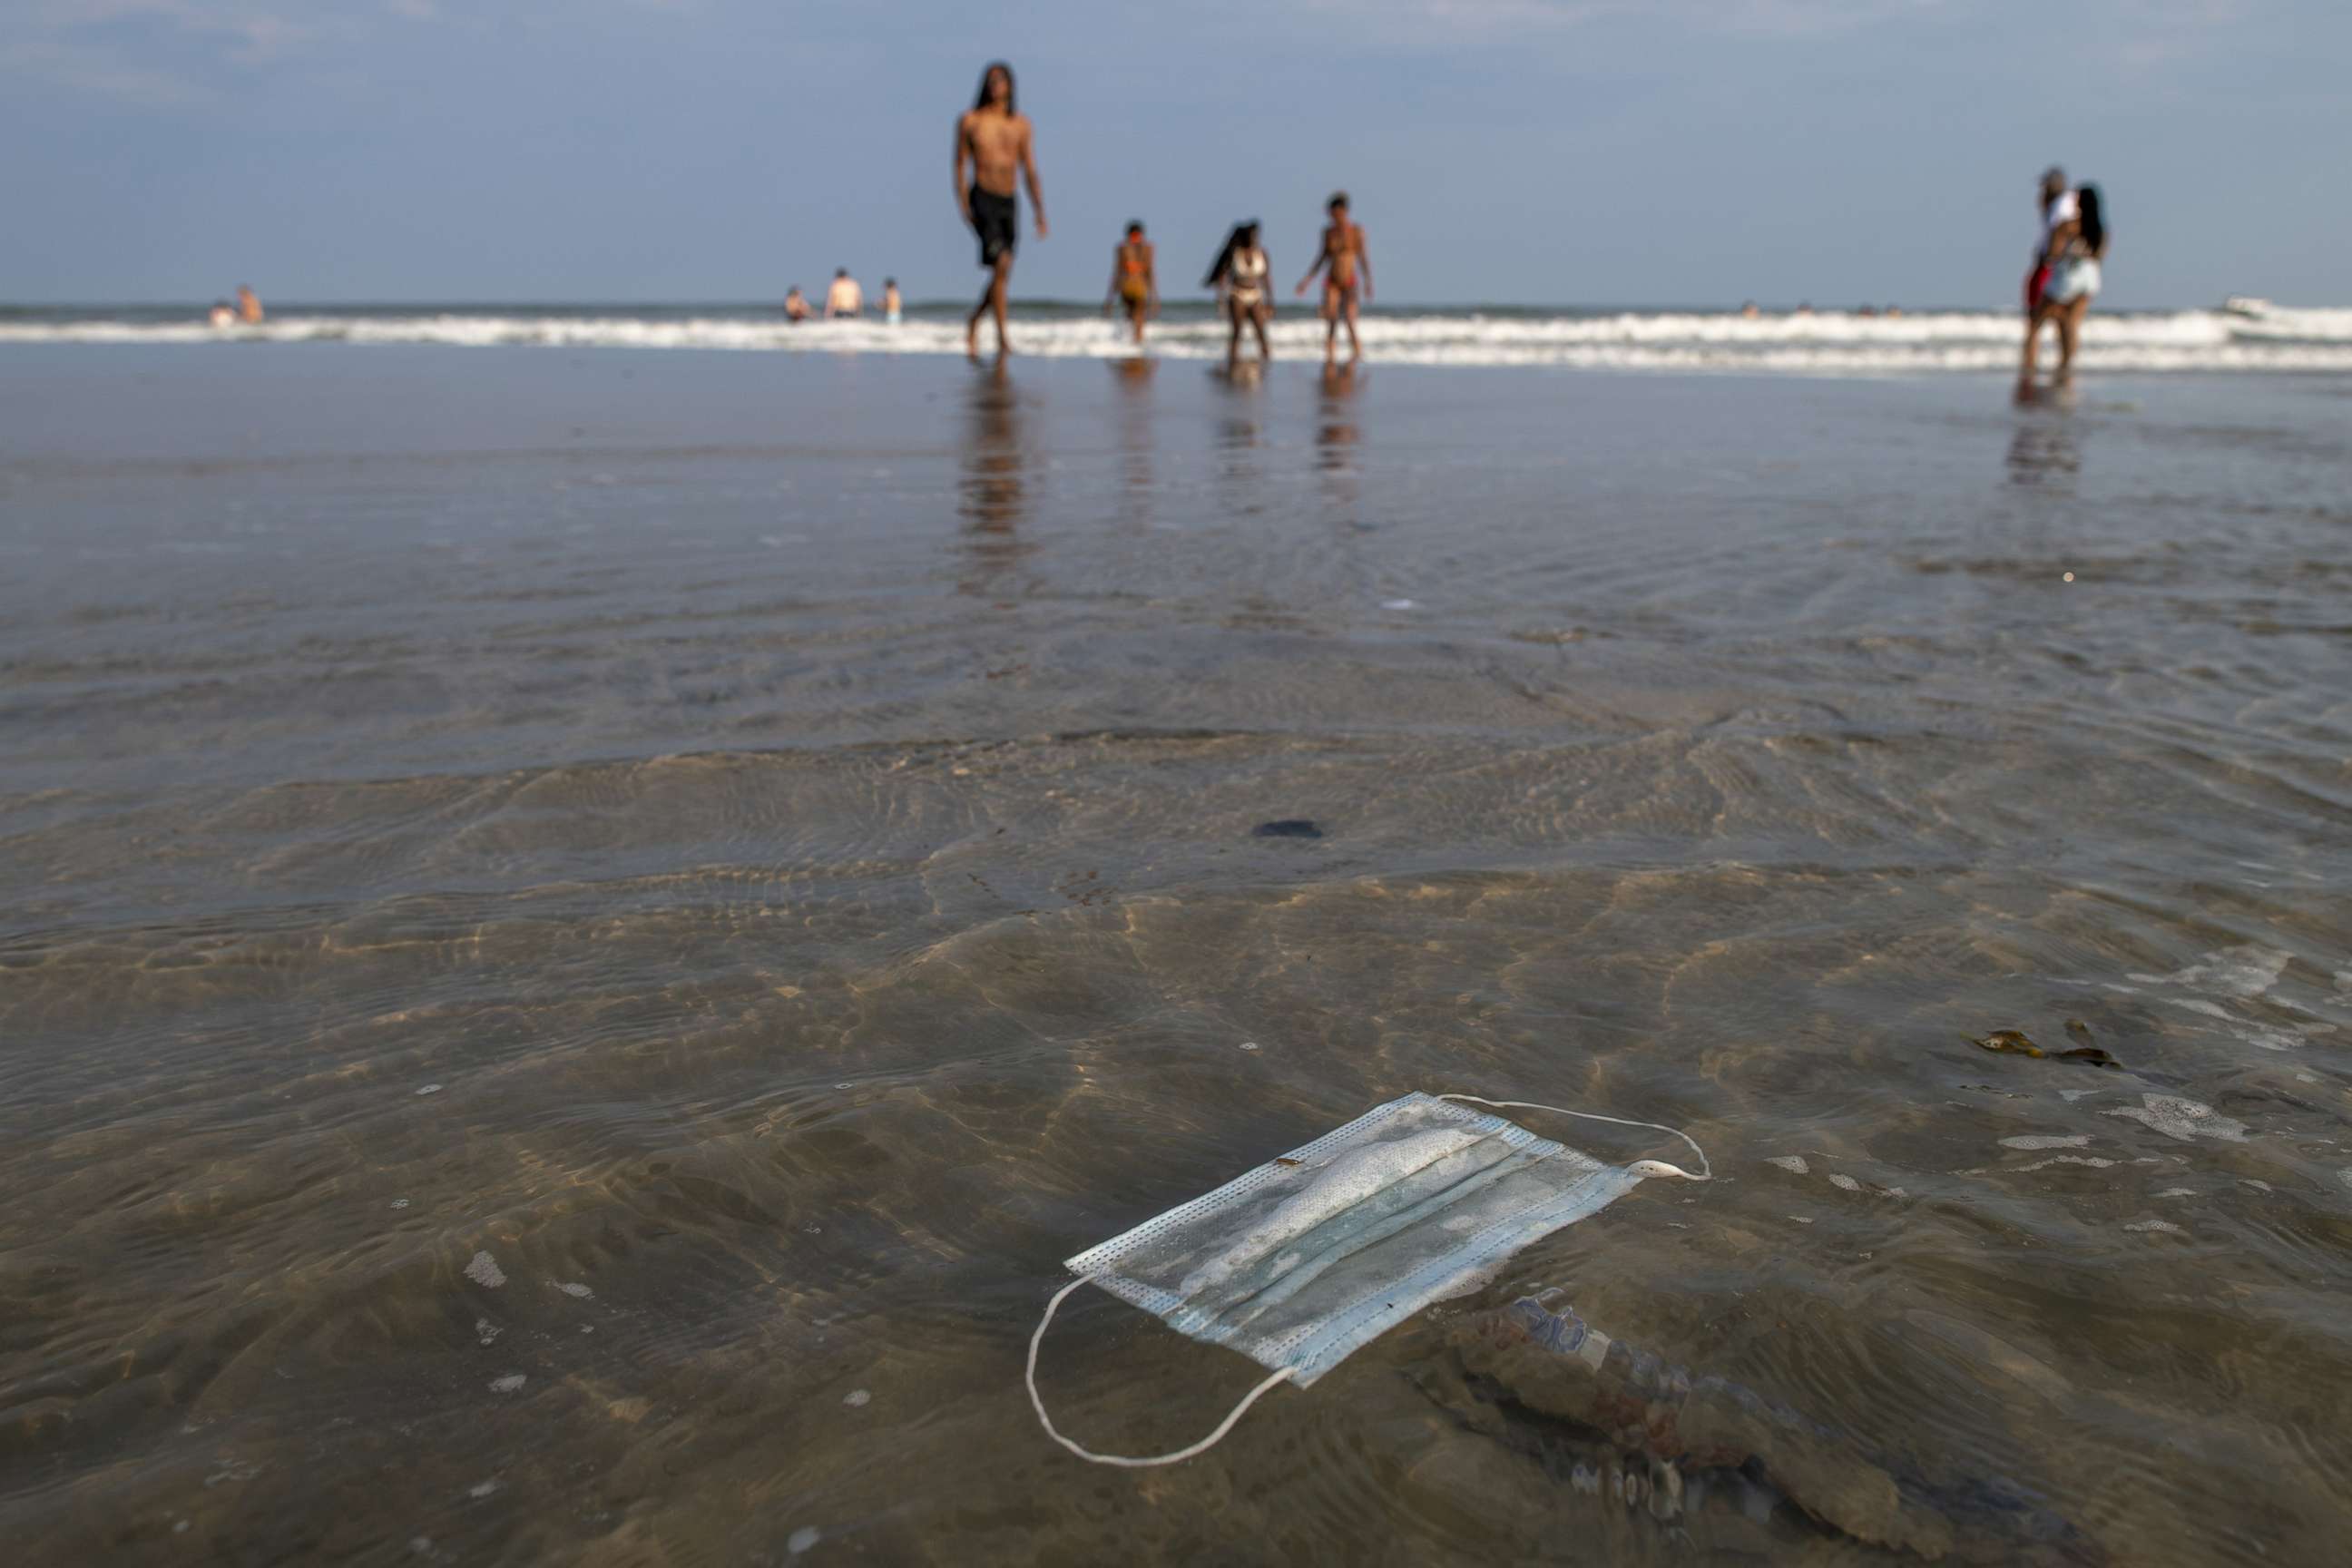 PHOTO: A discarded mask floats in the ocean surf, July 3, 2020, in Wildwood, N.J.